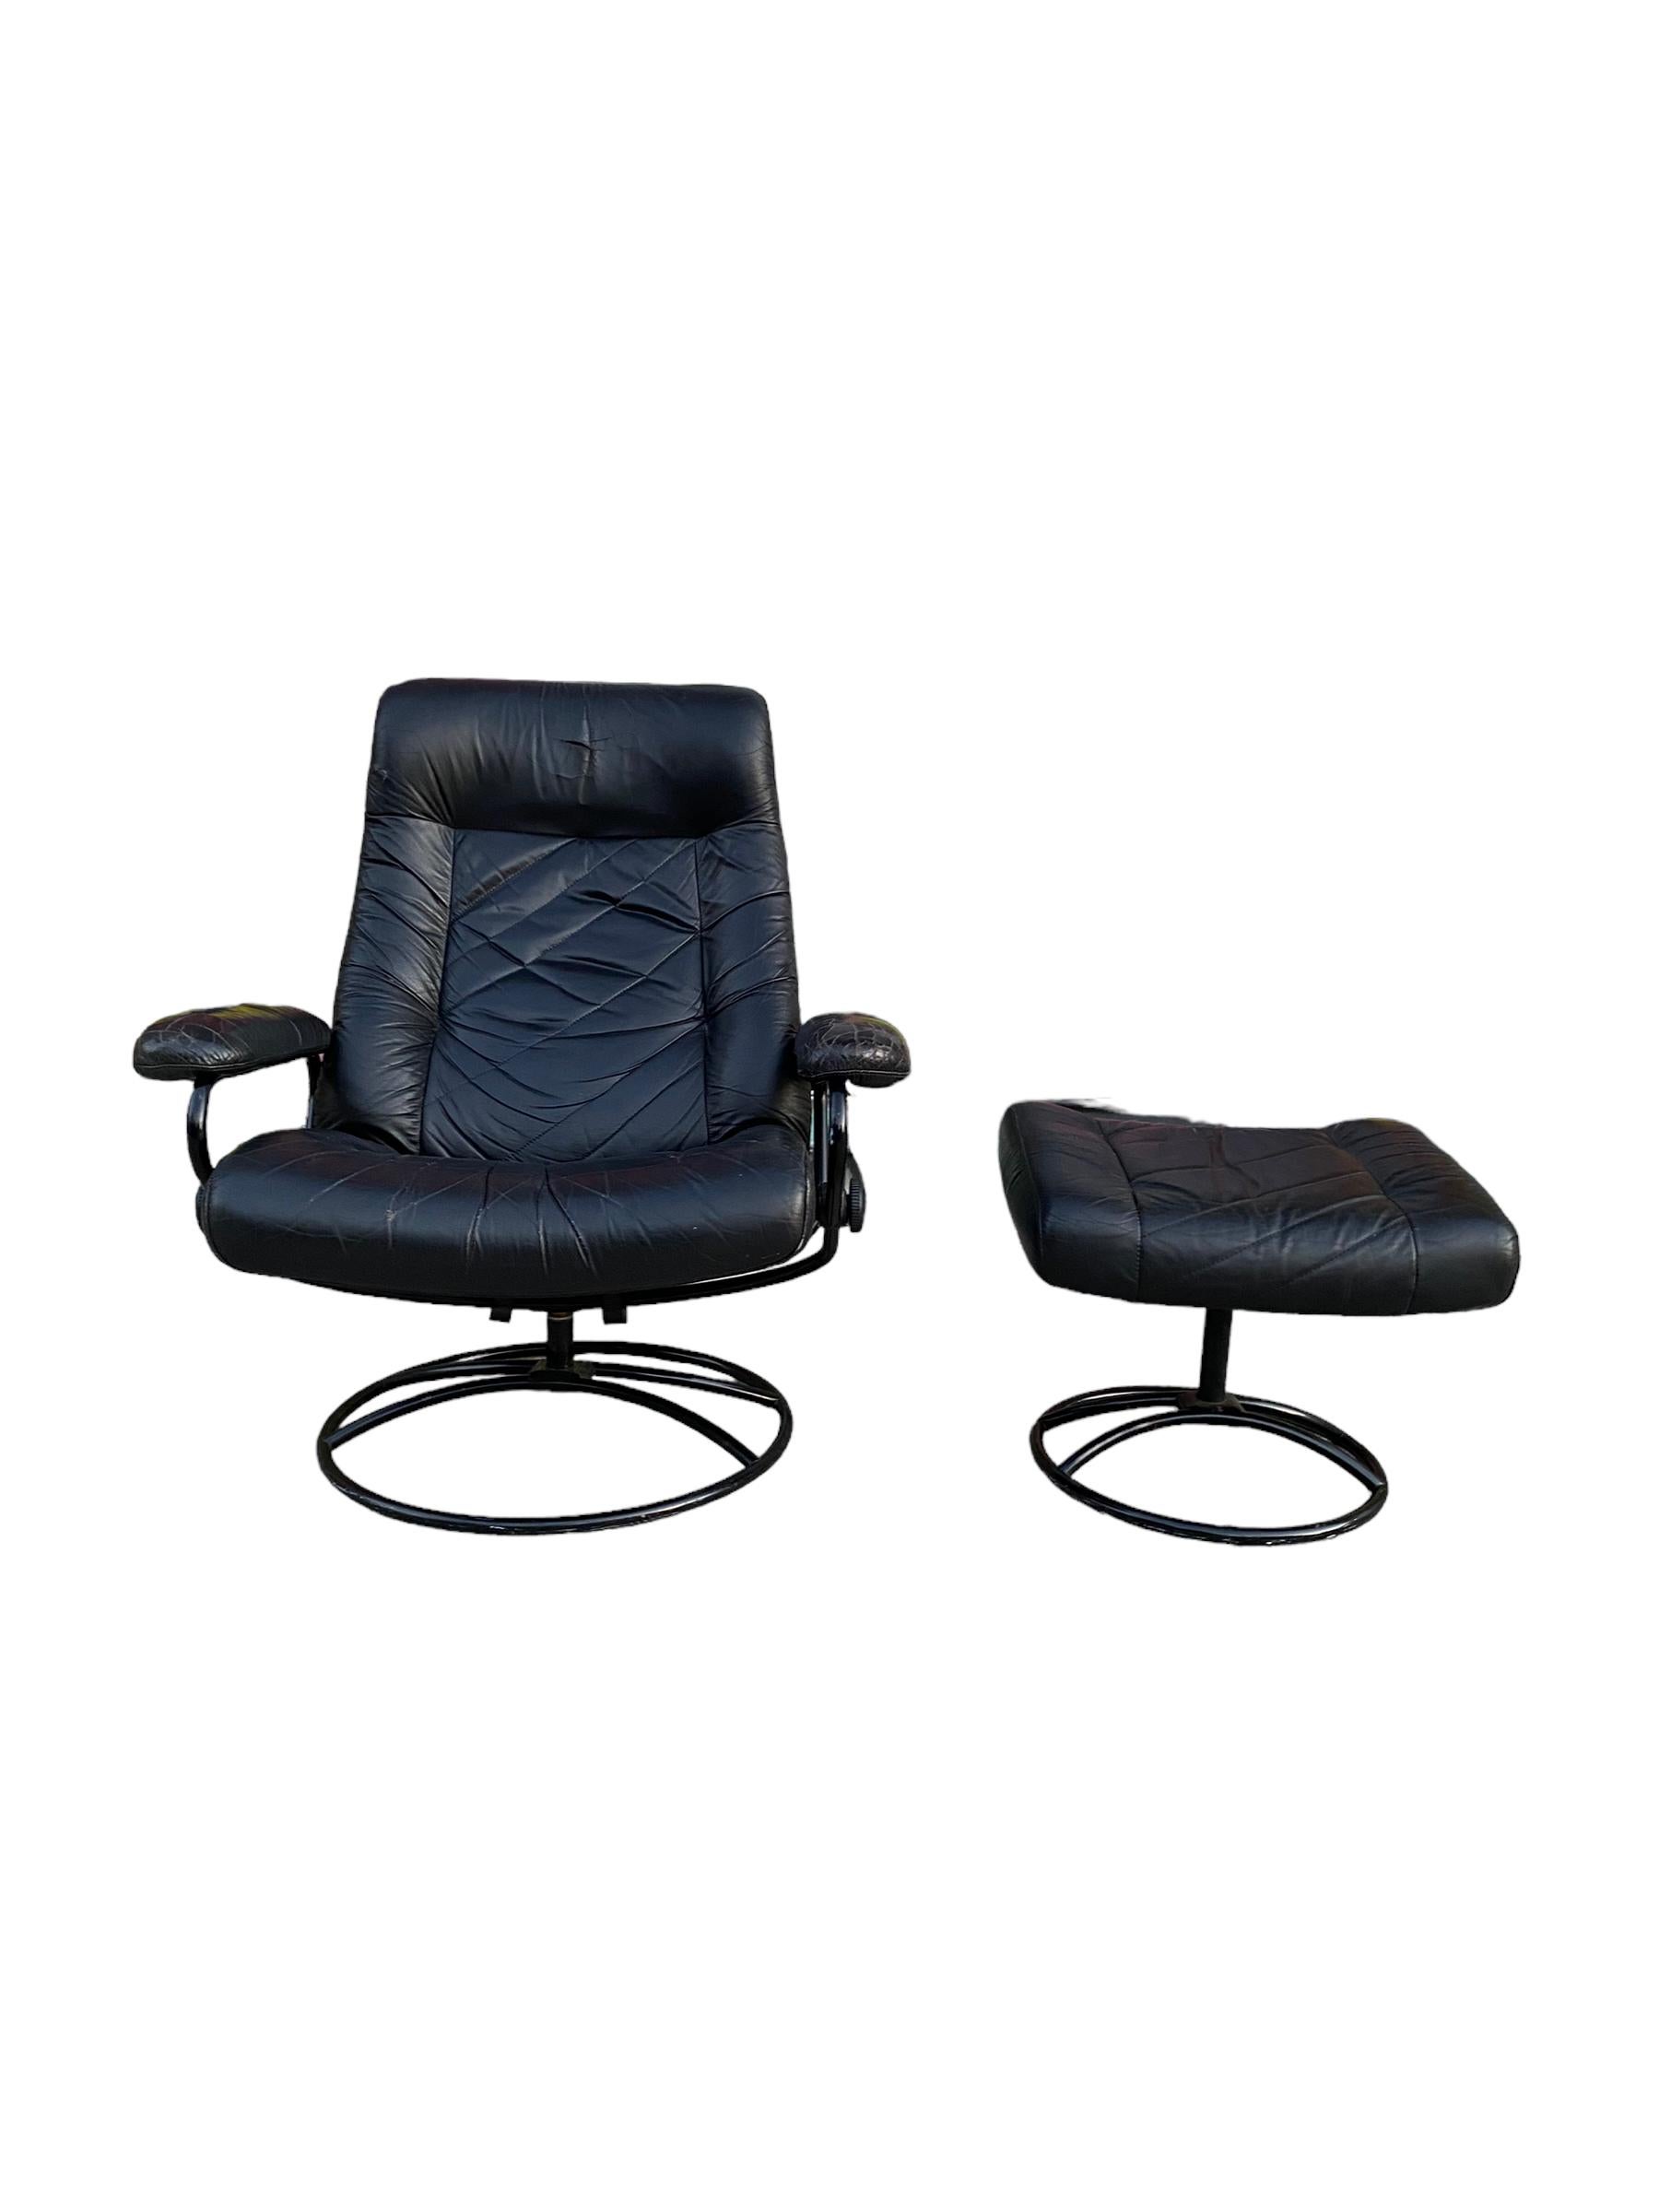 Ekornes Stressless reclining lounge chair and ottoman. Elegant midcentury Scandinavian design with tubular bent steel frame with black powder coat  and black leather cushion. Lounge in comfort with this timeless design.